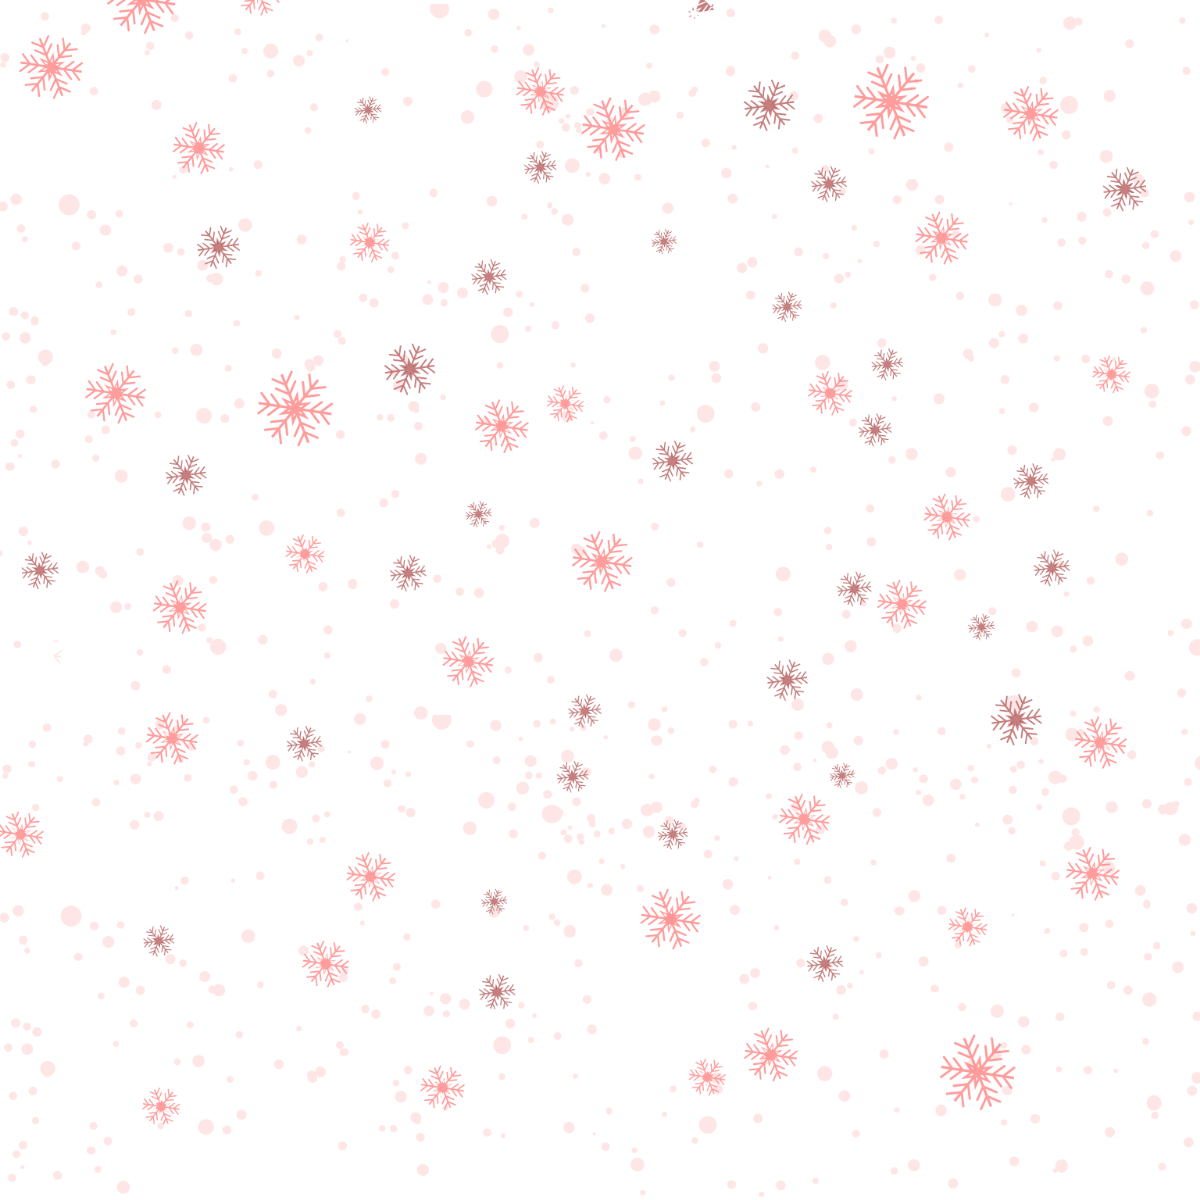 Free Falling Snowflakes Vector Template